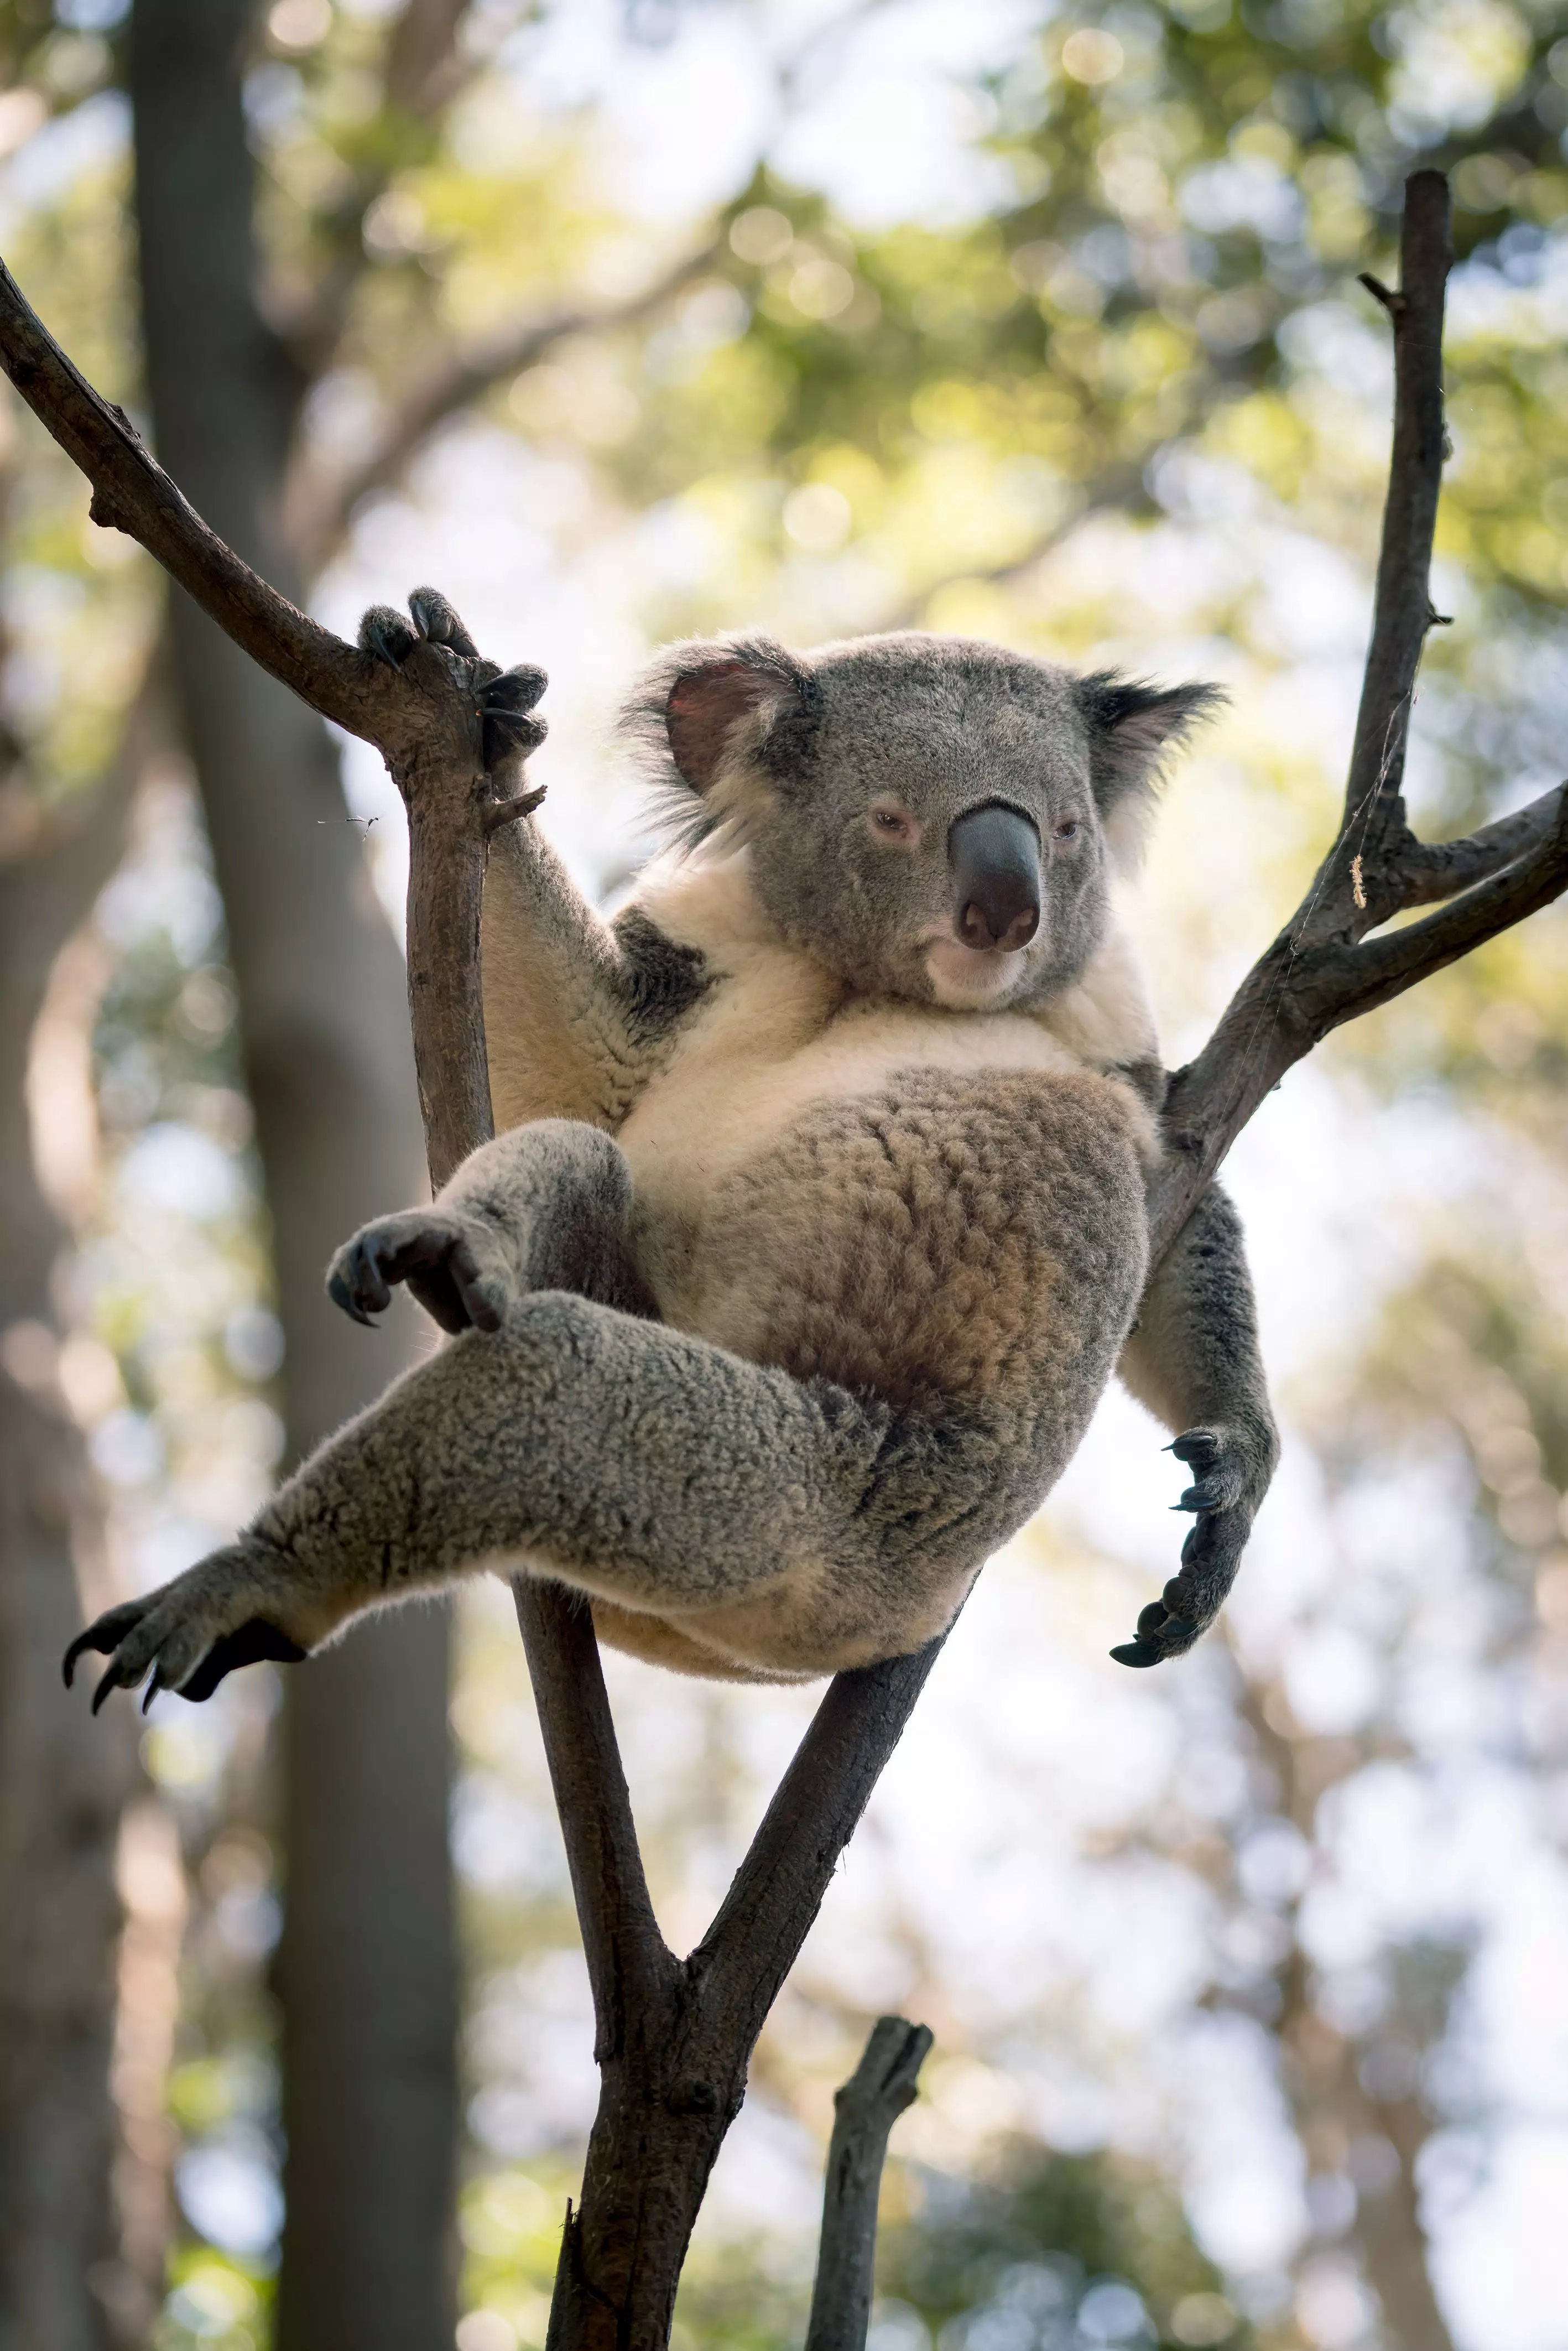 The koala was photographed relaxing in a tree.